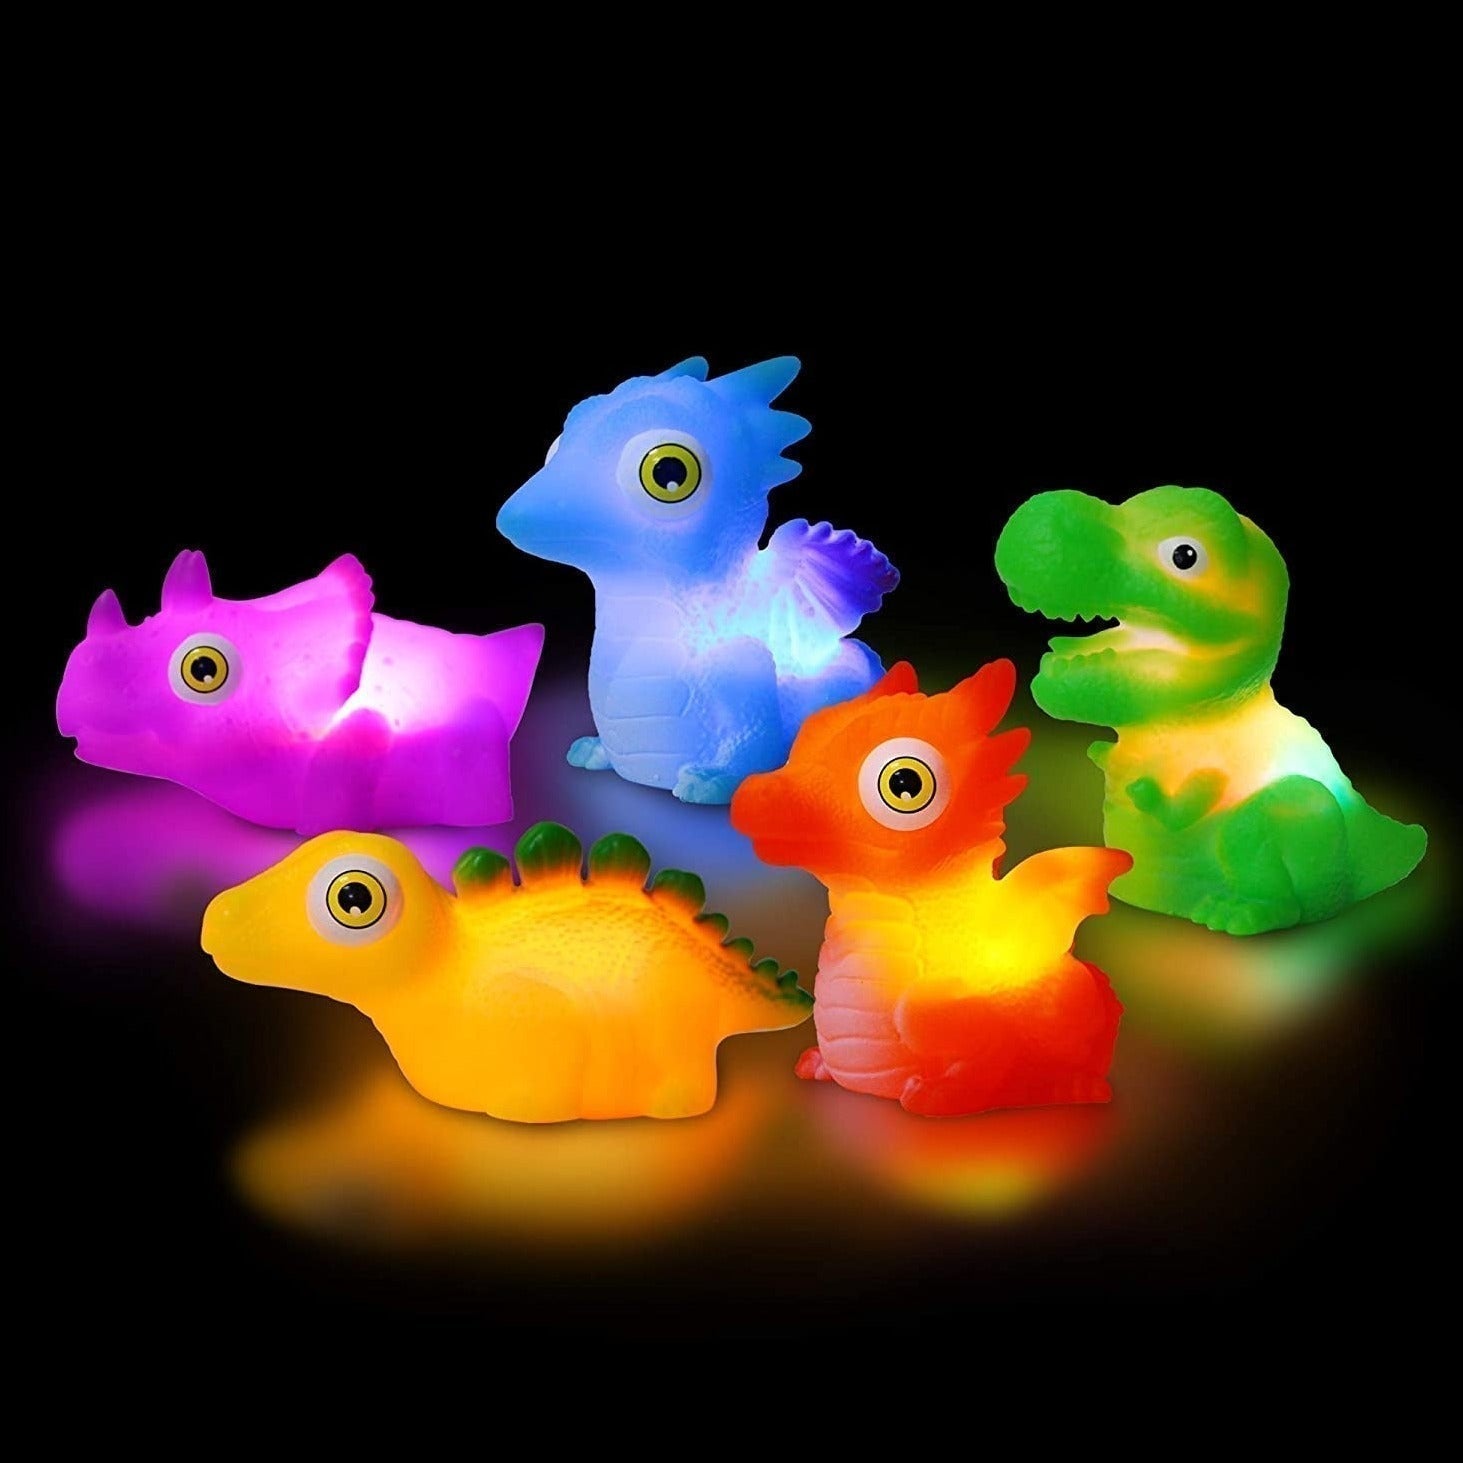 Light Up Dinosaur Bath Toy, Make bath time an exciting adventure with the Light Up Dinosaur Bath Toy! This incredible water activated bath light is shaped like a fearsome dinosaur and will instantly light up and flash as soon as it touches the water. Watch as your little one's face lights up with wonder and excitement!This bath toy is perfect for adding a touch of fun and excitement to your child's bath time routine. The light up feature will keep them entertained as the dinosaur bobs and floats around the 